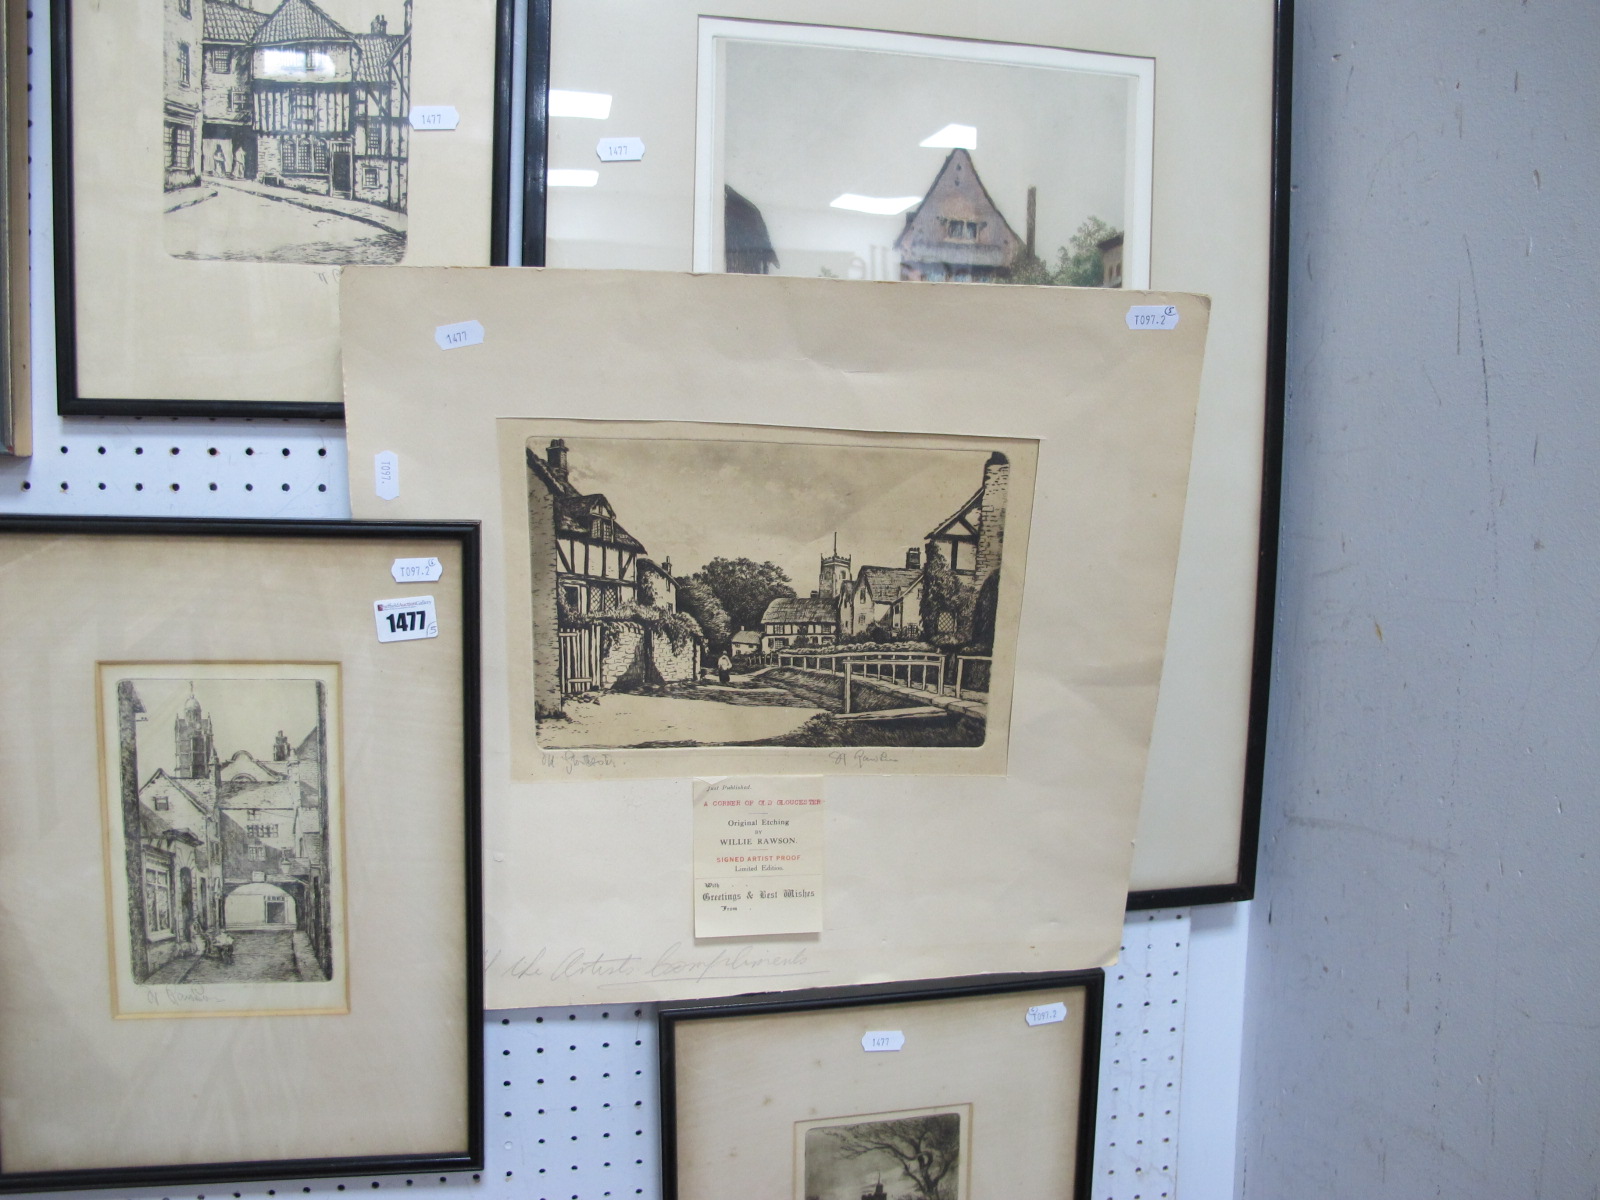 Three Framed Willie Rawson Etchings, all signed; together with an unframed Willie Rawson etching